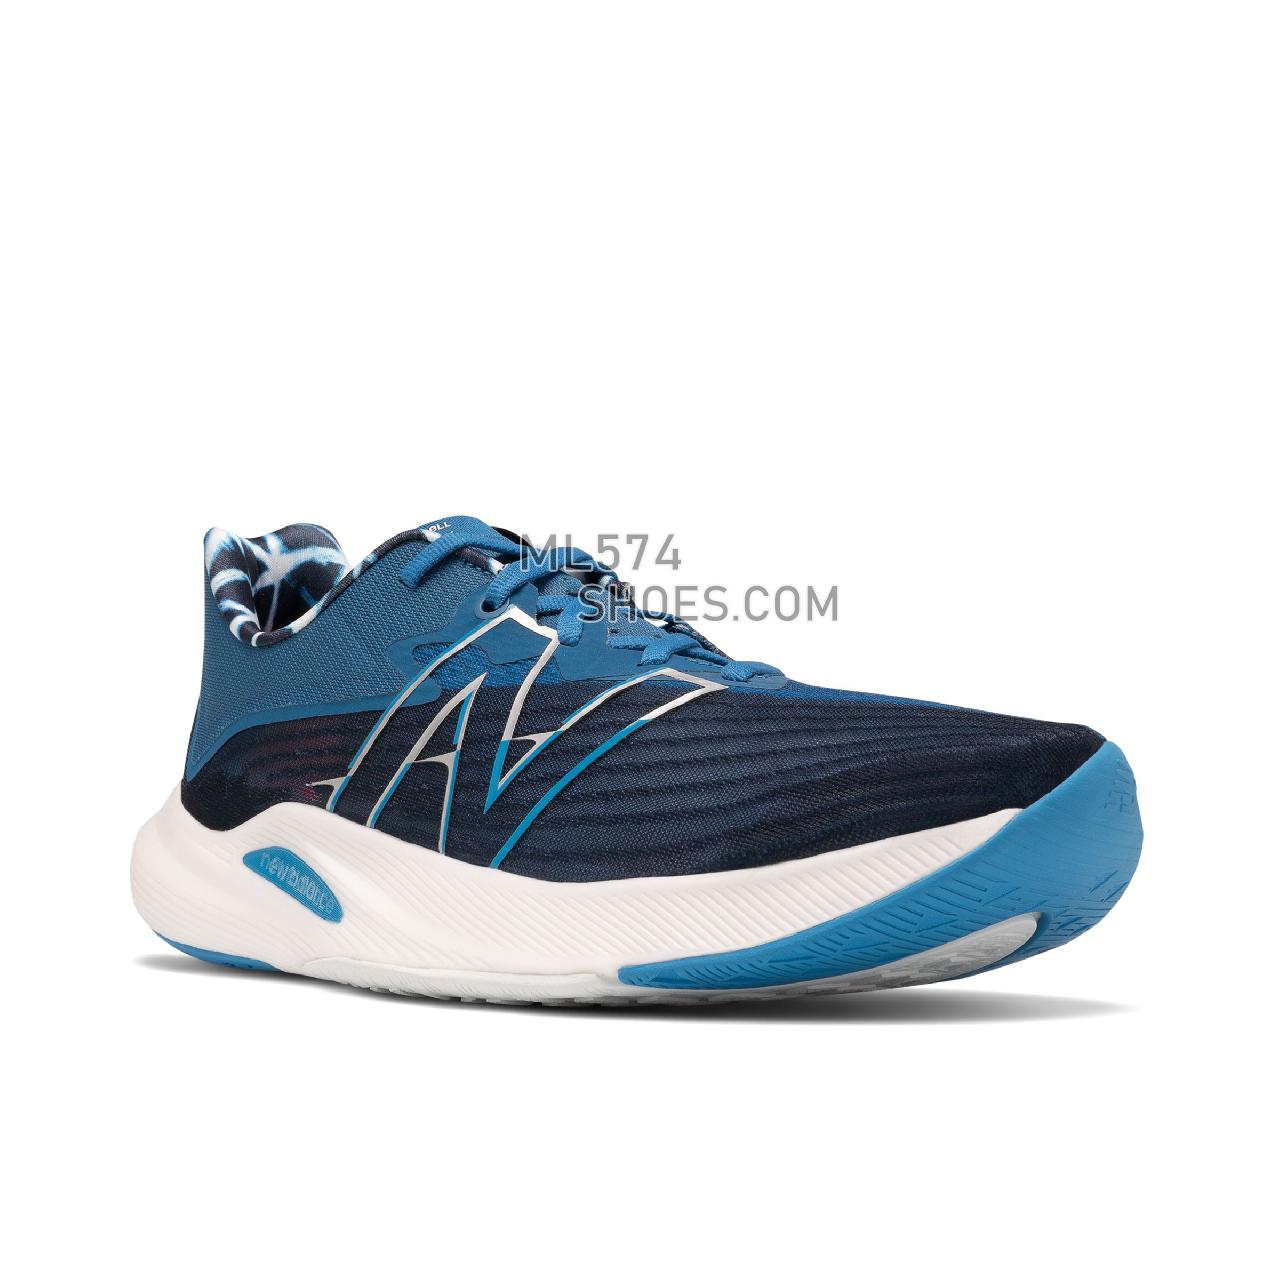 New Balance FuelCell Rebel v2 - Men's Fuelcell Sleek And LightWeight - Eclipse with Neo Flame - MFCXZ2